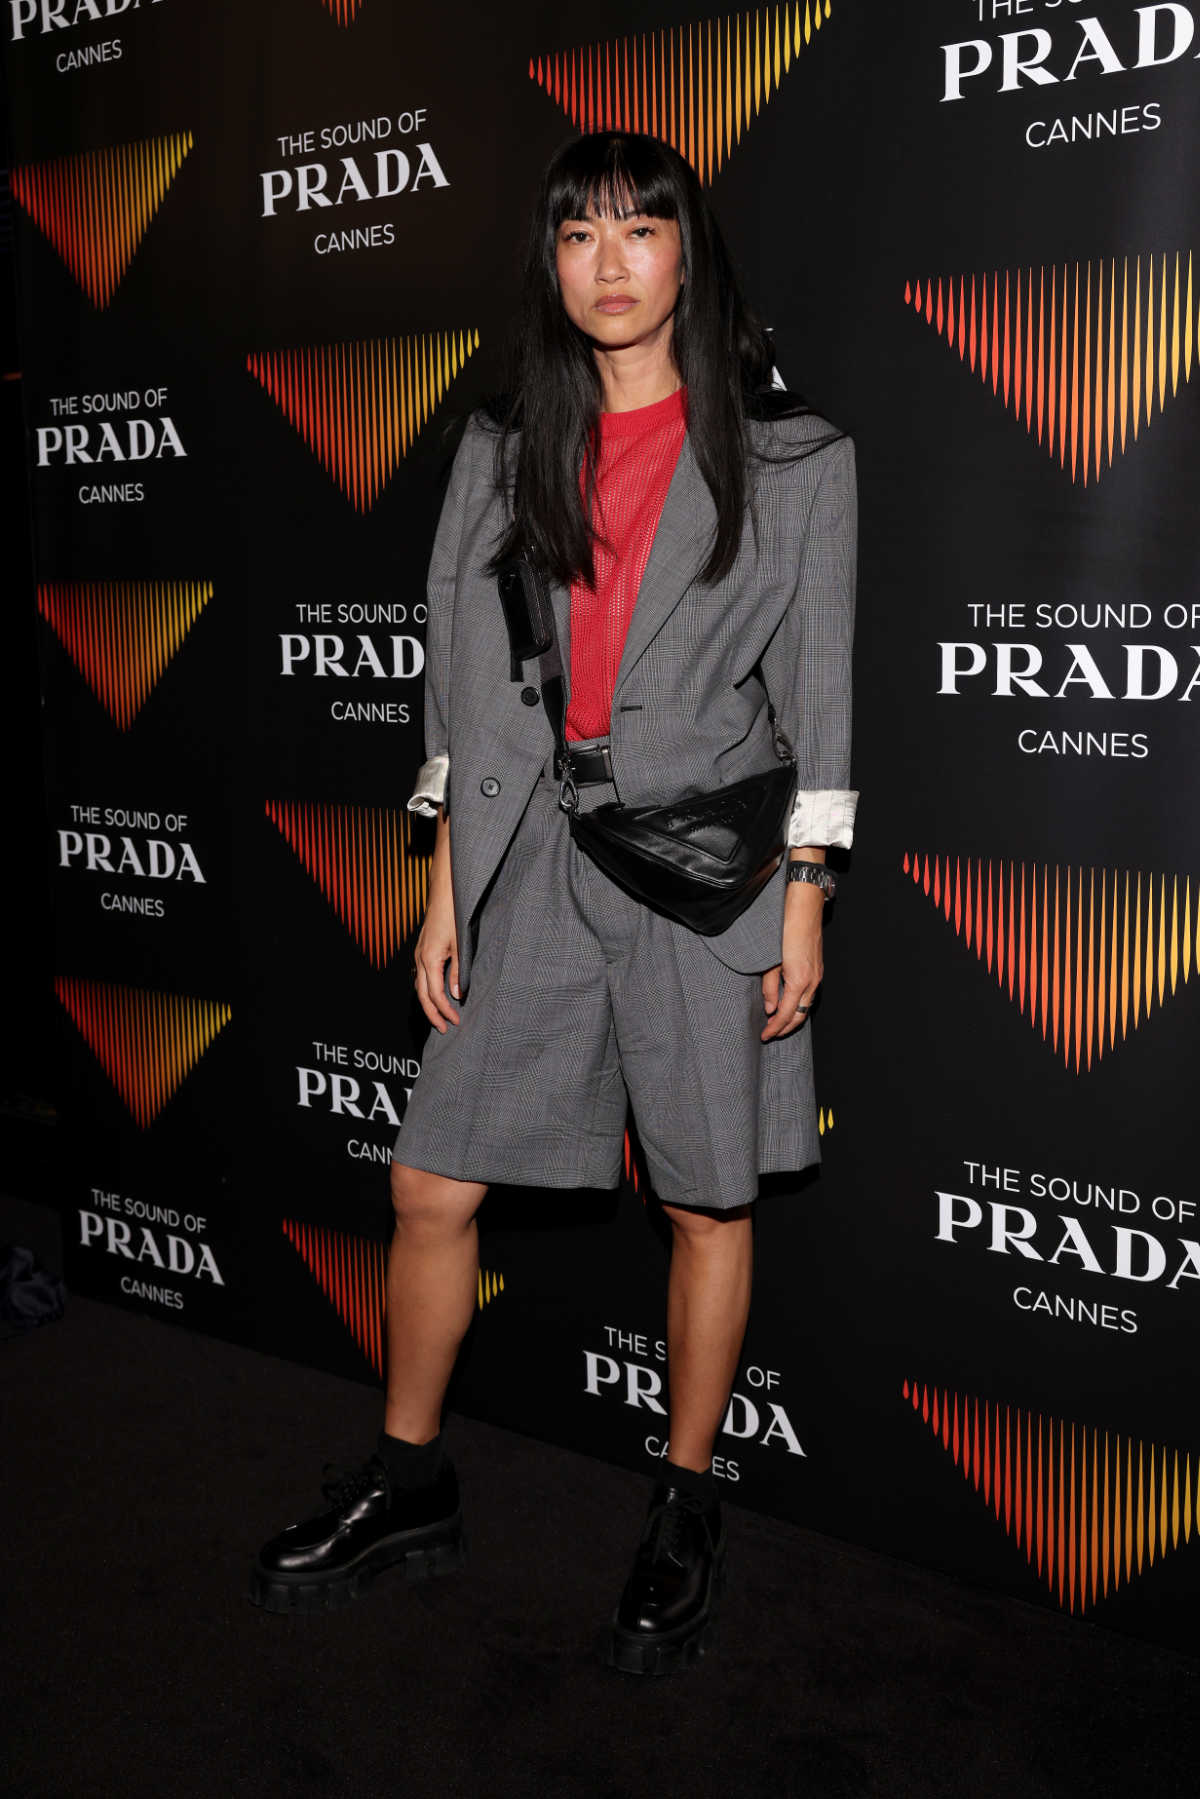 'The Sound Of Prada' - 24-25 May 2022 In Cannes